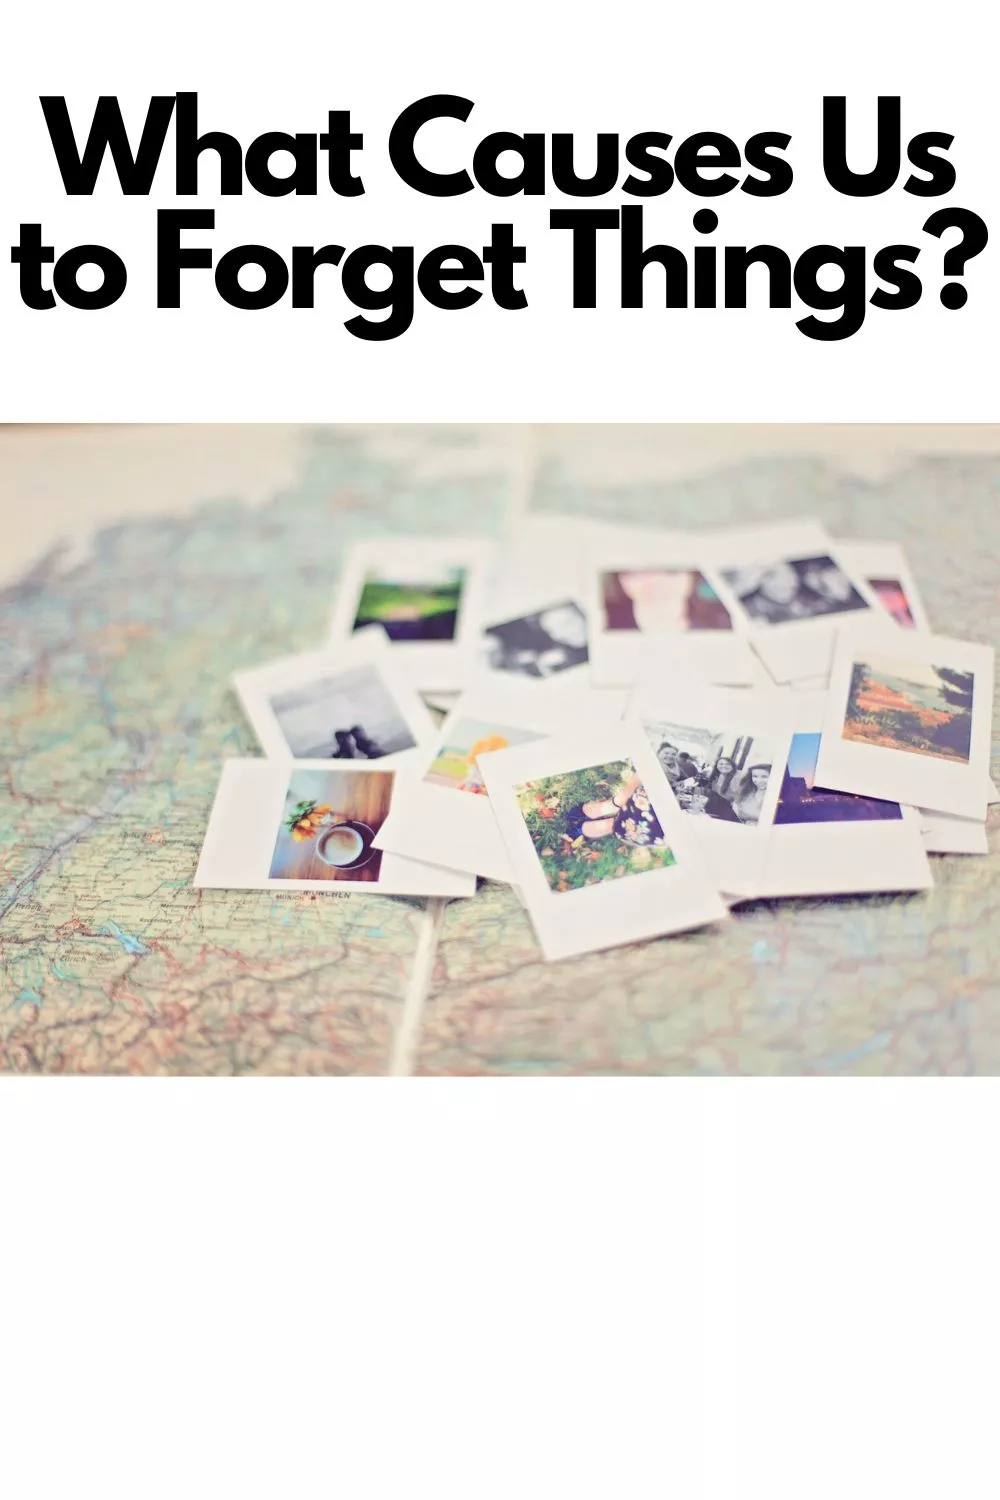 What Causes Us to Forget Things